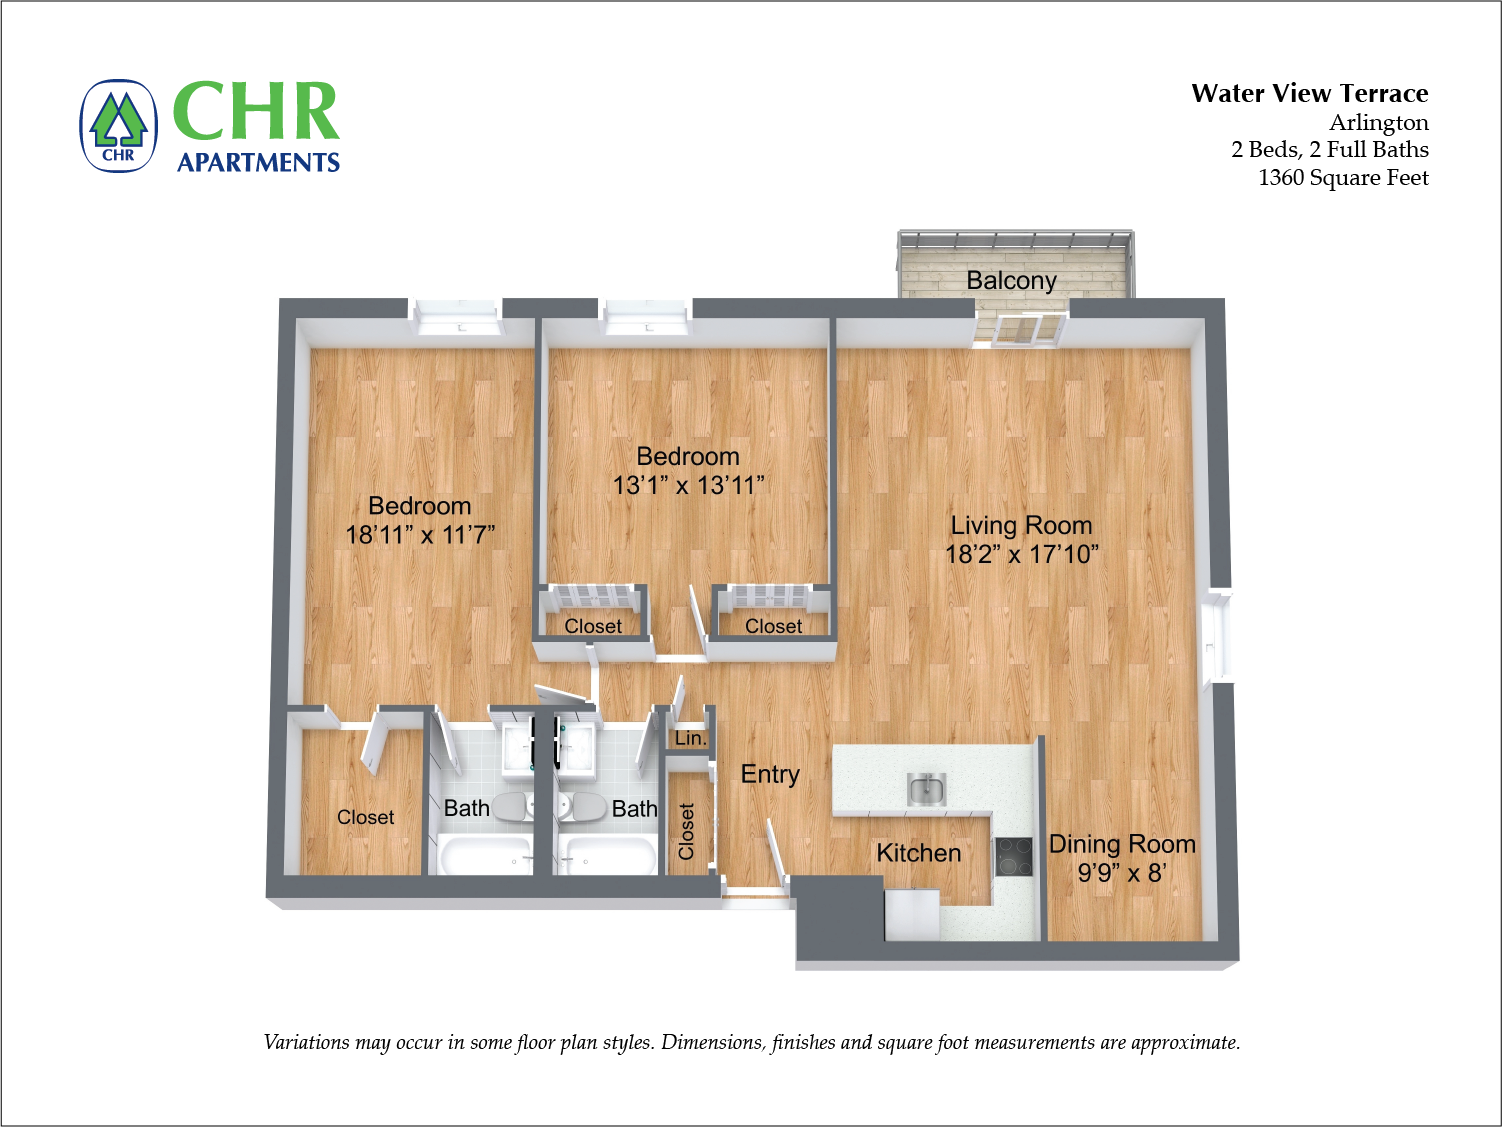 Click to view 2 Bed/2 Bath Extra Large with Balcony floor plan gallery